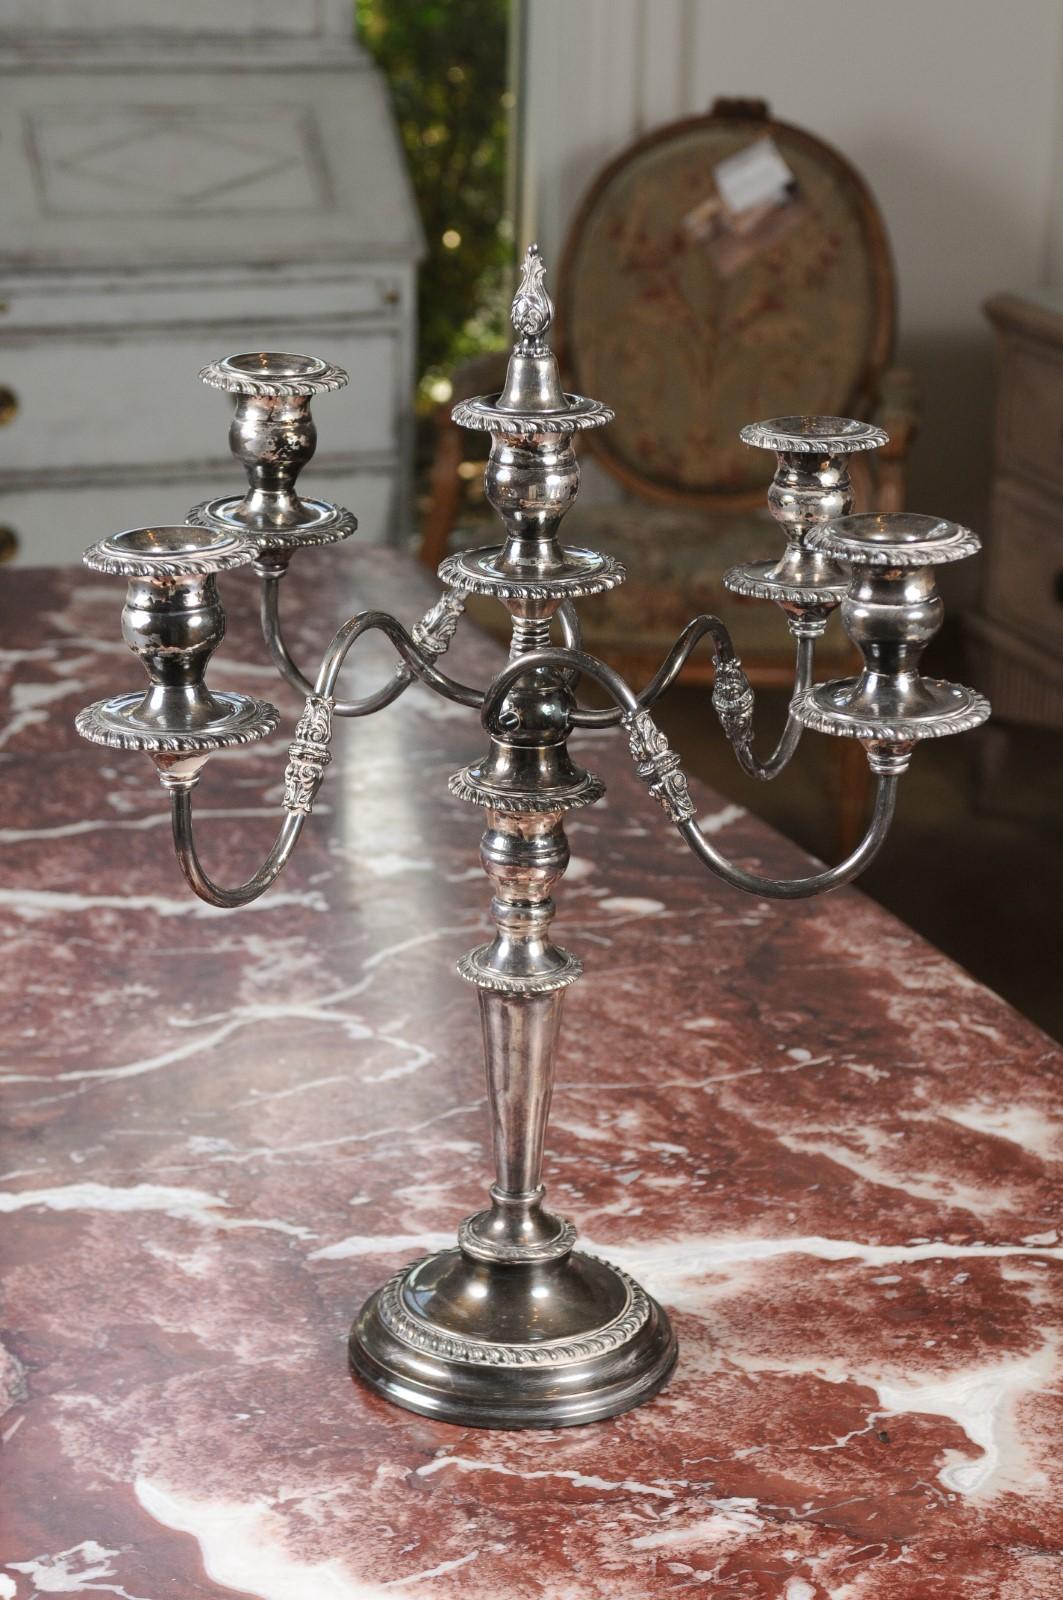 American Silver Plated Four-Arm Candelabra with Foliage and Scrolling Accents 7